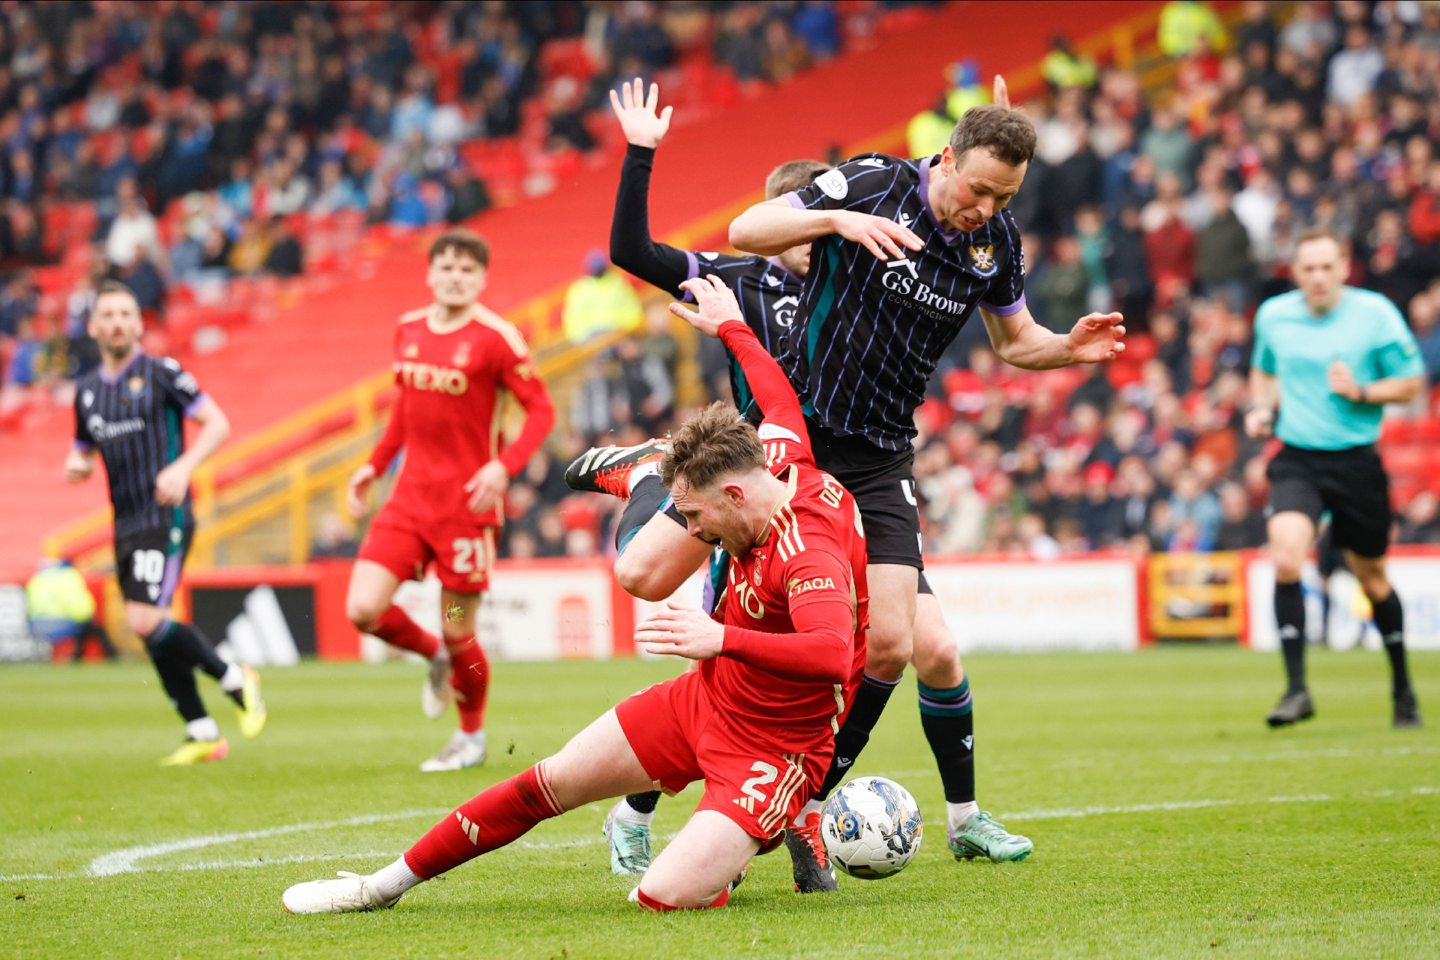 Nicky Devlin (2) of Aberdeen is fouled by St Johnstone Andrew Considine (4), Referee Chris Graham awards a penalty. Image: Shutterstock 